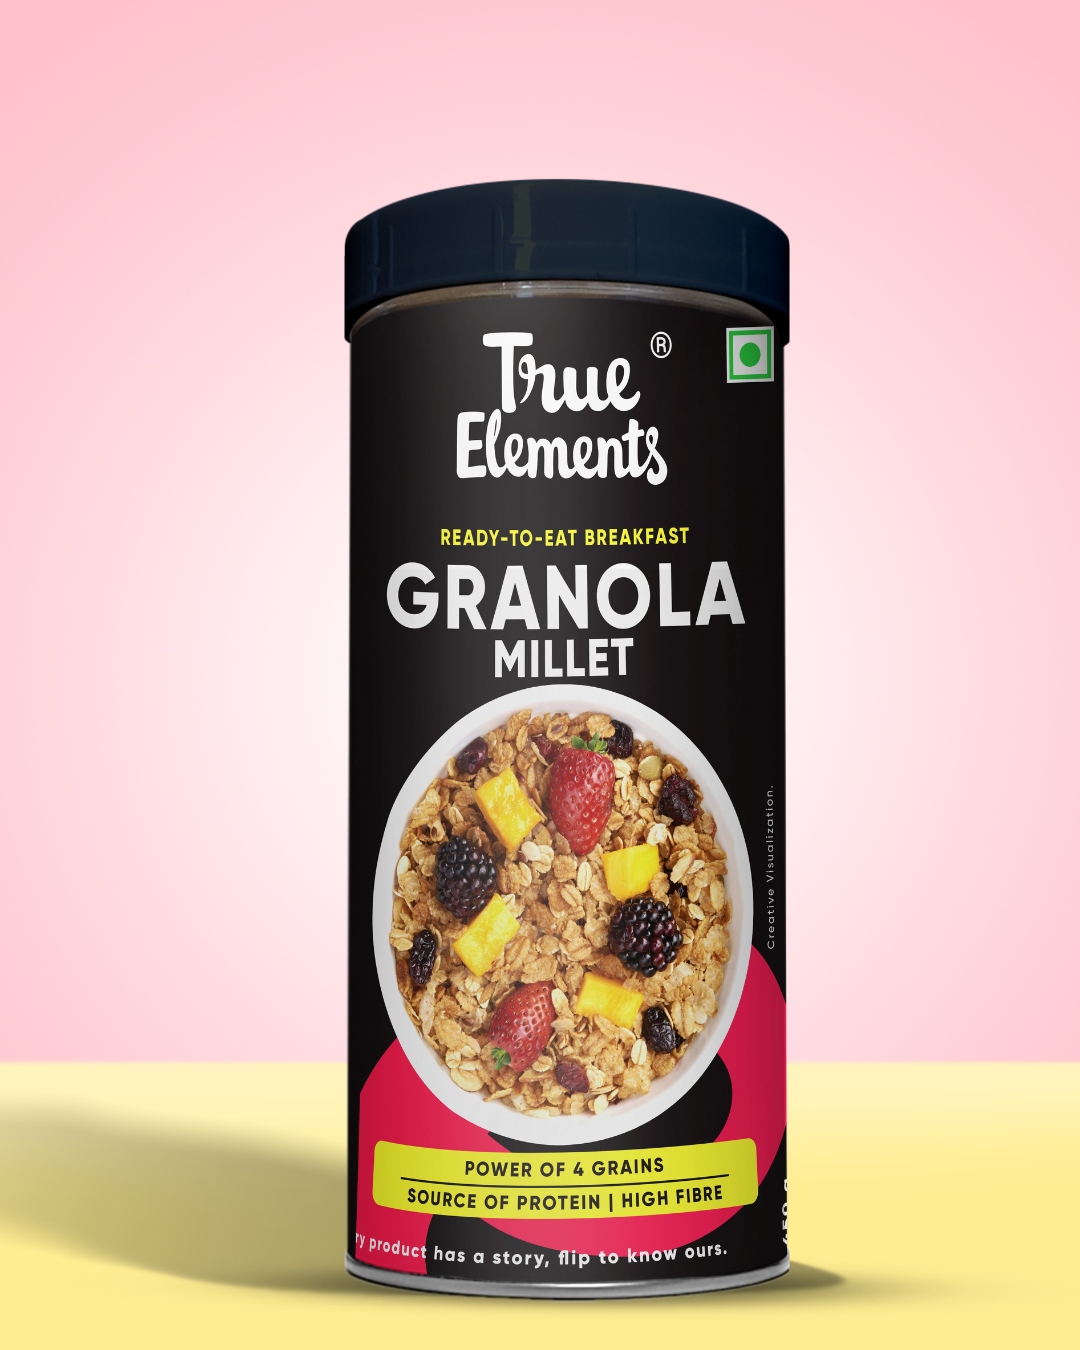 True Elements Millet Granola with Almonds and Cranberries Image